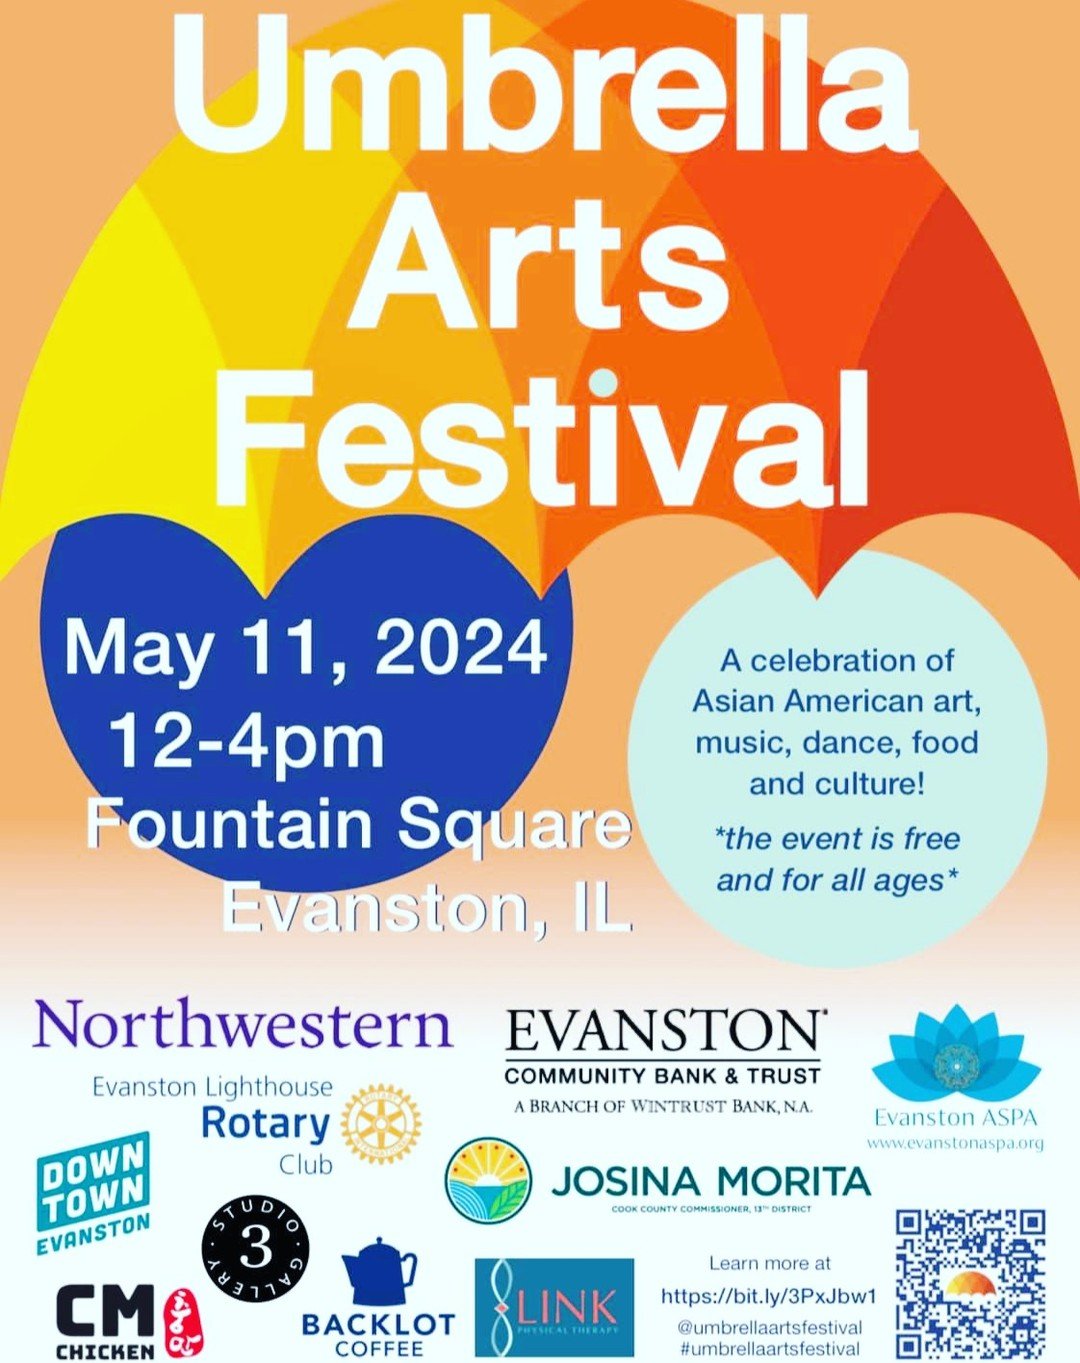 Join us at the Umbrella Arts Festival on Saturday, May 11!

We'll be making books and collages with @reginigloria of @northbranchprojects and we can't wait to see you!

#umbrellaartsfestival #umbrellaartsfestival2024 @downtownevanston @evanstonaspa @